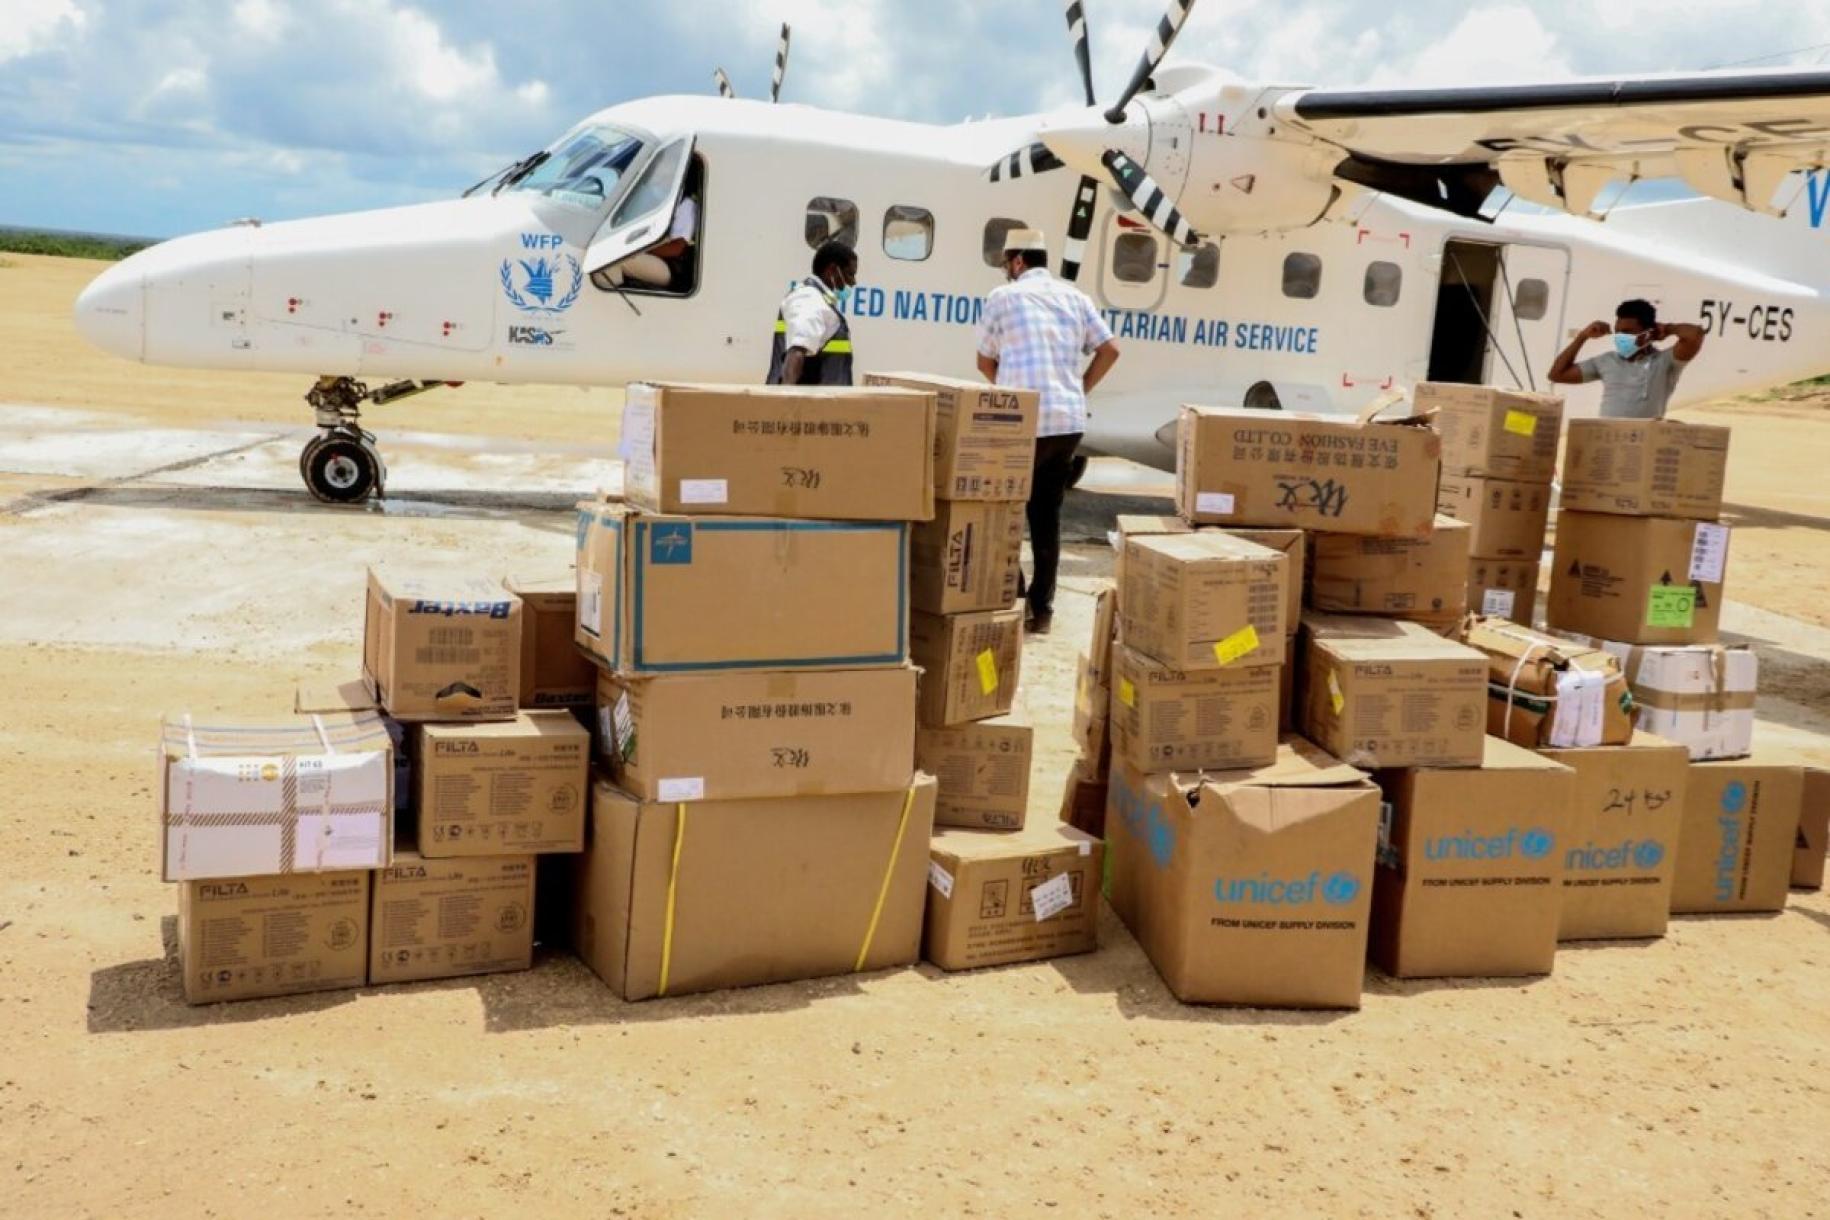 An aircraft with the WFP emblem is shown with boxes of supplies in the foreground.